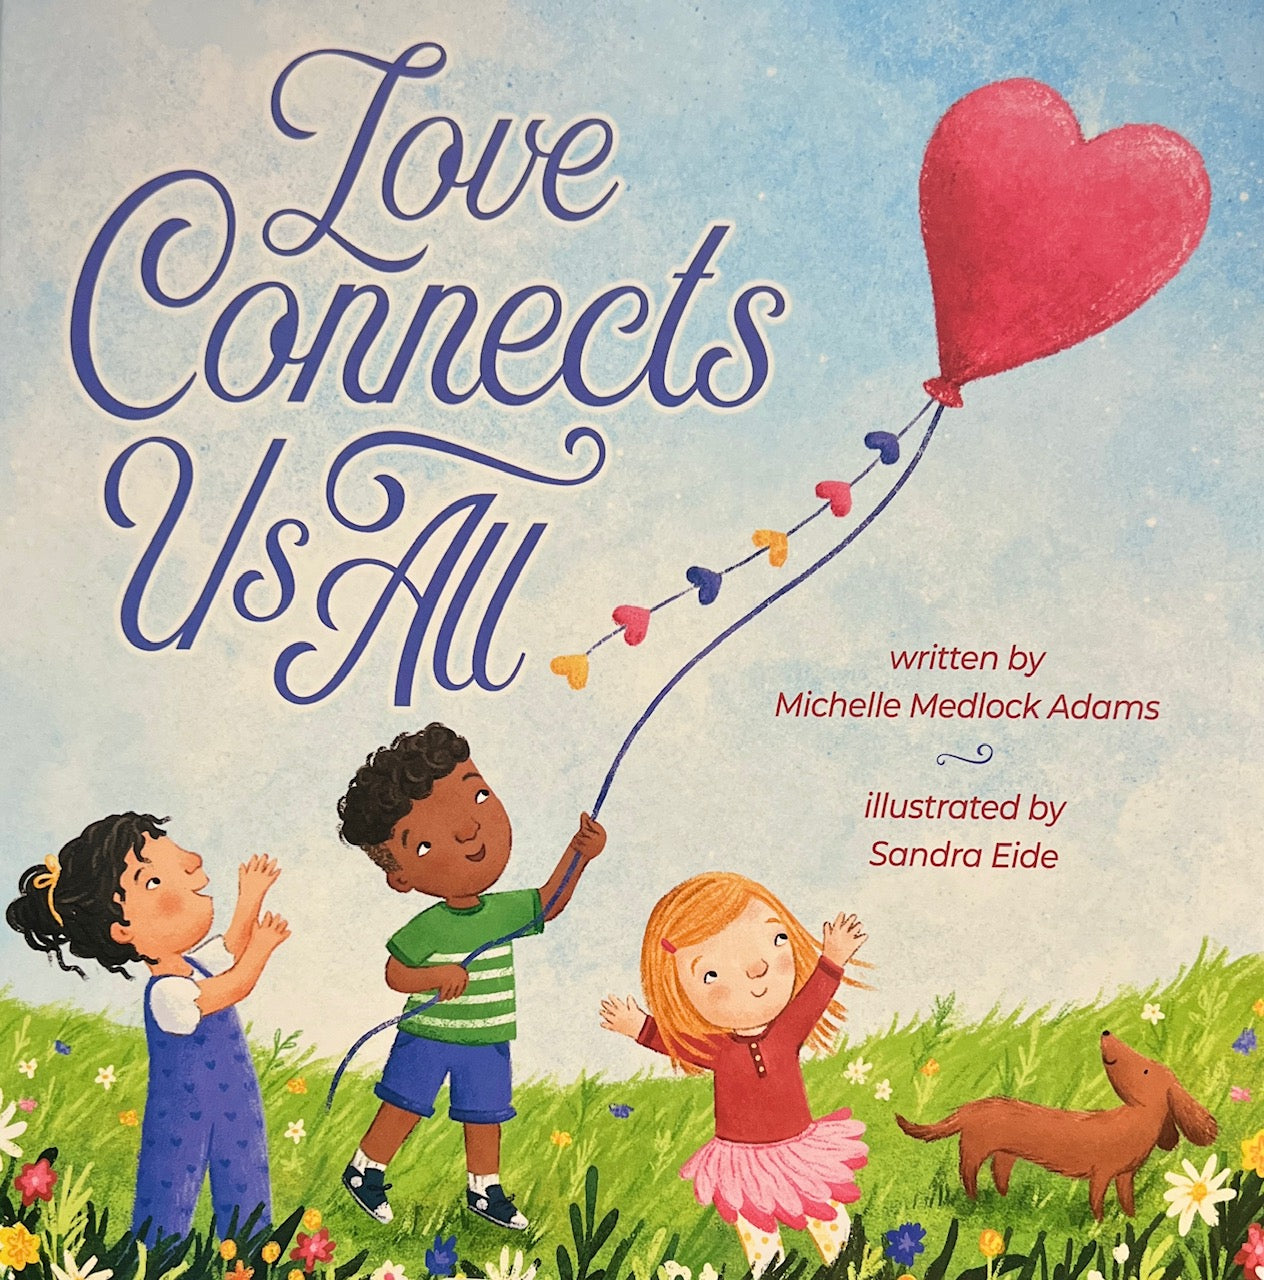 Love Connects Us All - written by Michelle Medlock Adams